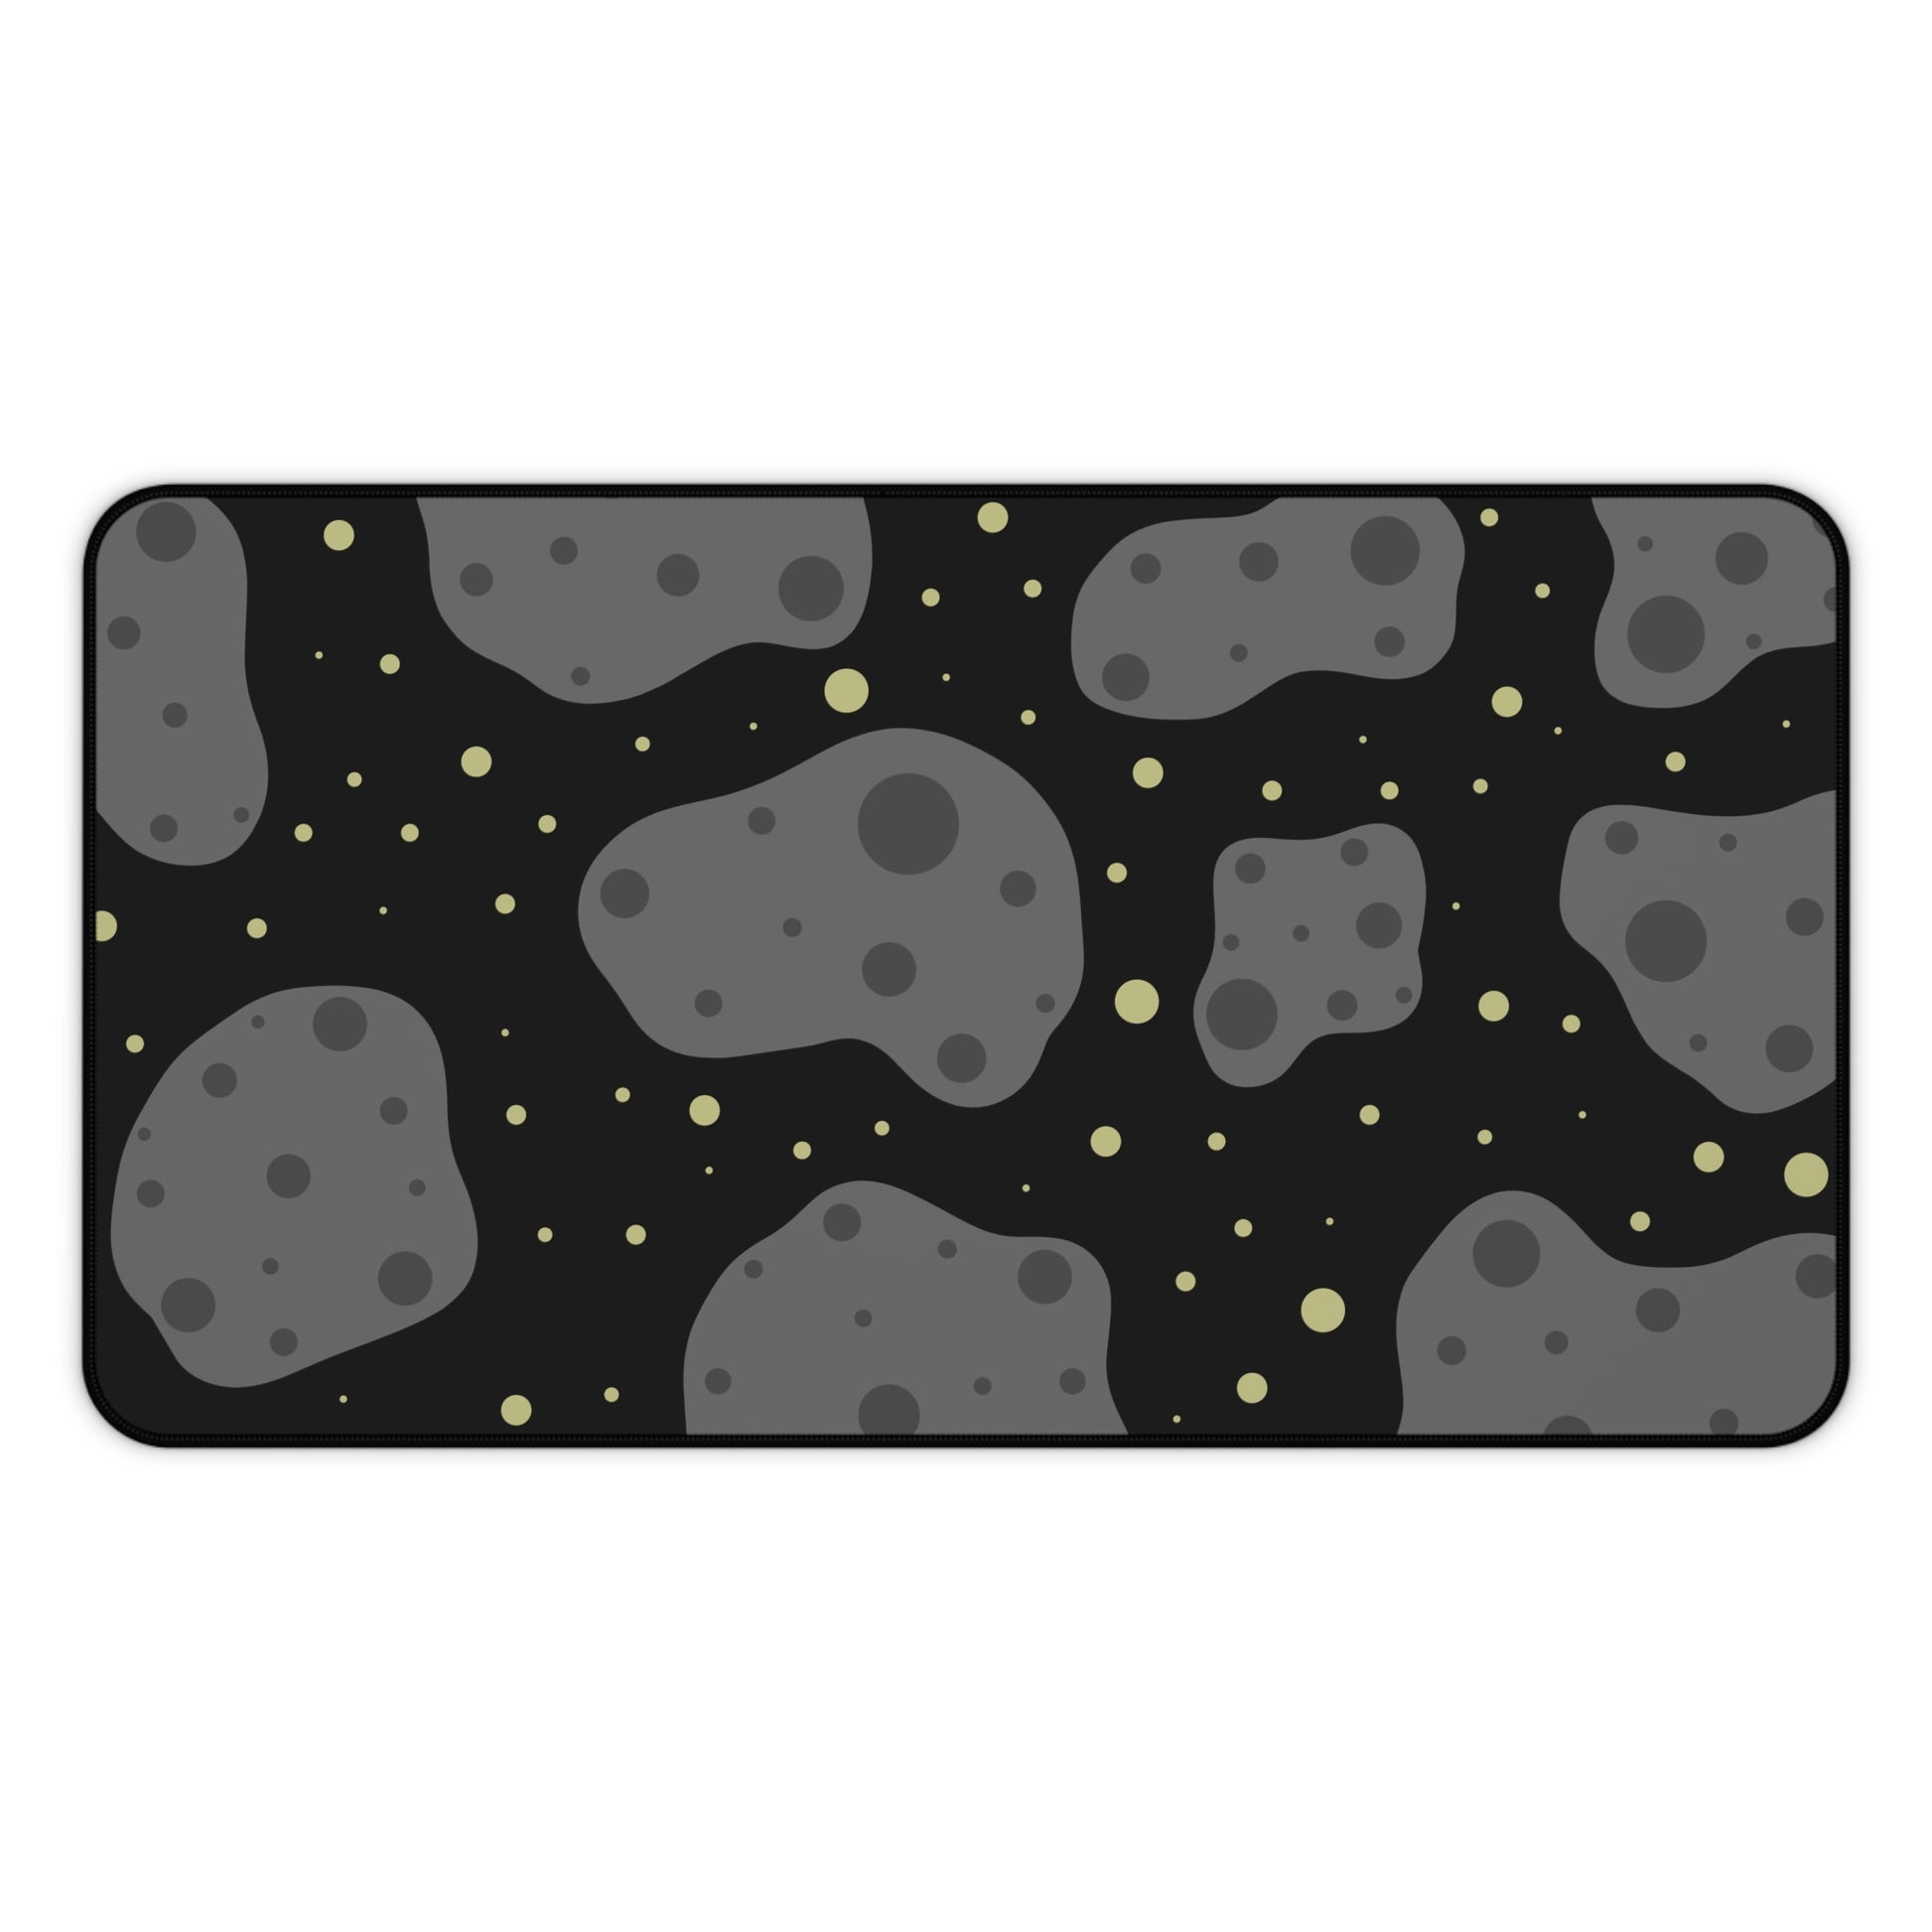 A 12" x 22" desk mat with a black background, gray asteroids, and yellow stars.